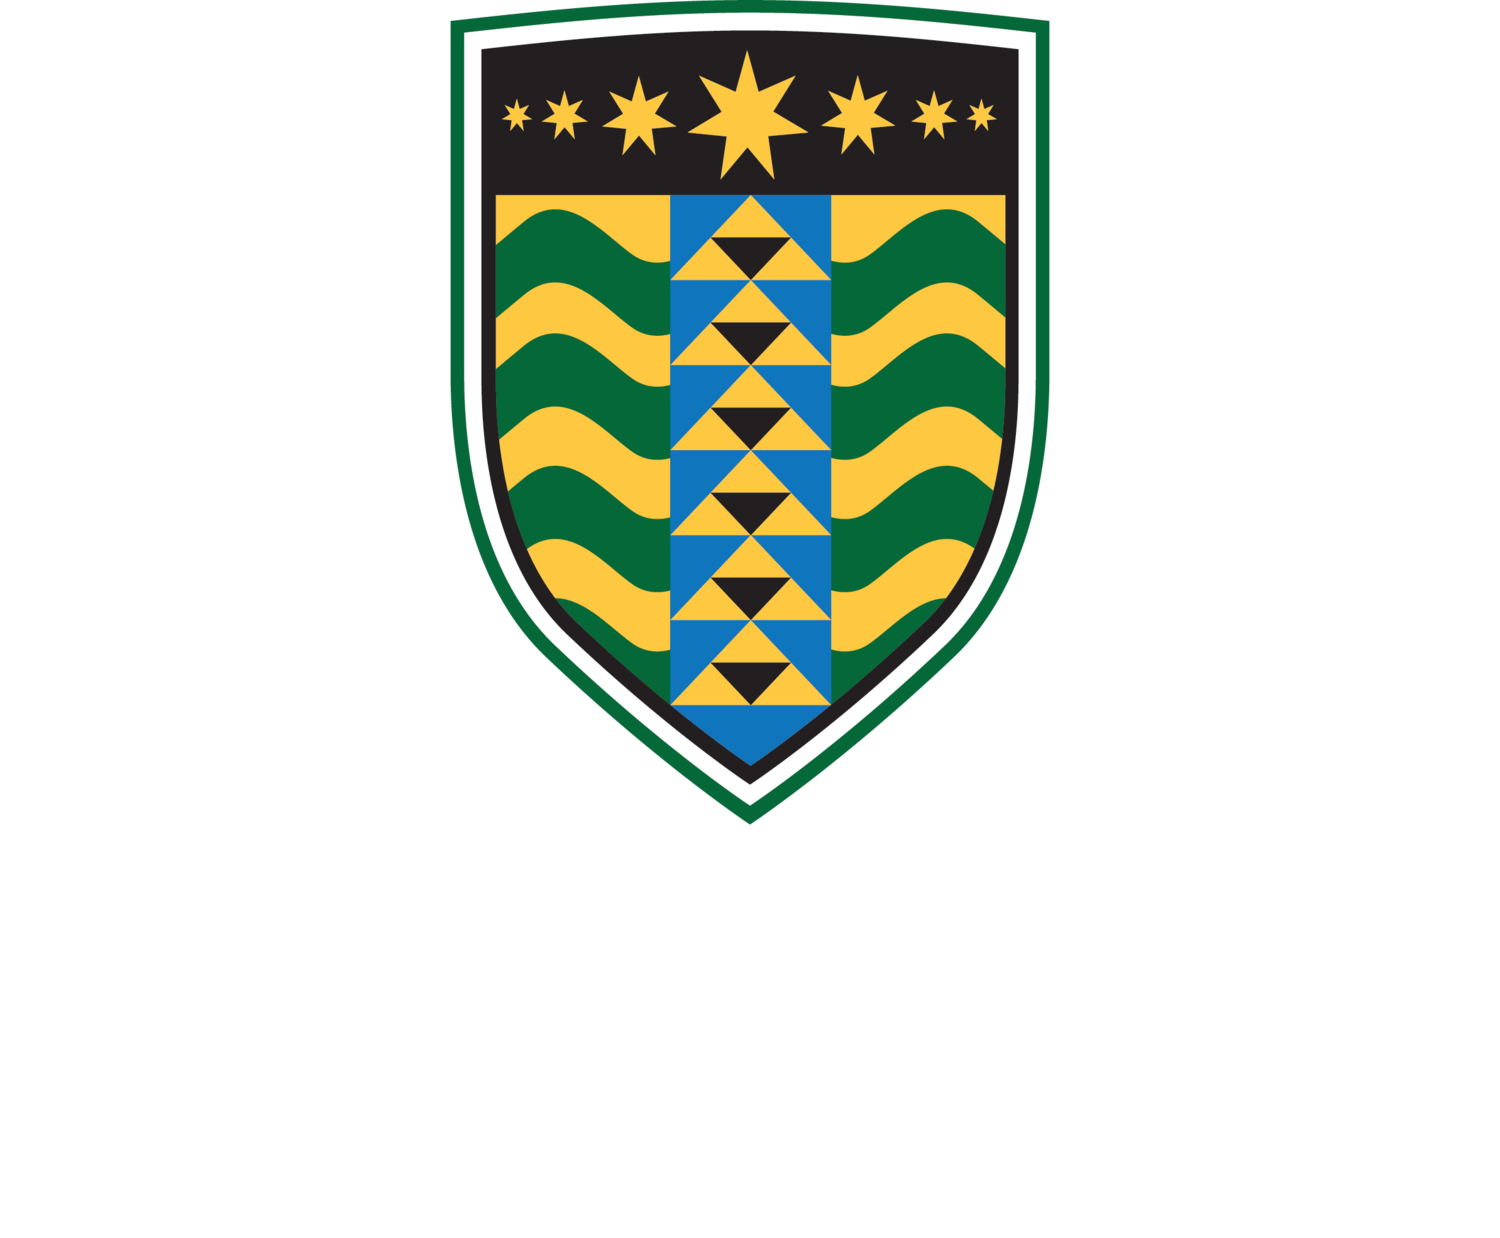 Waikato-Tainui College for Research and Development